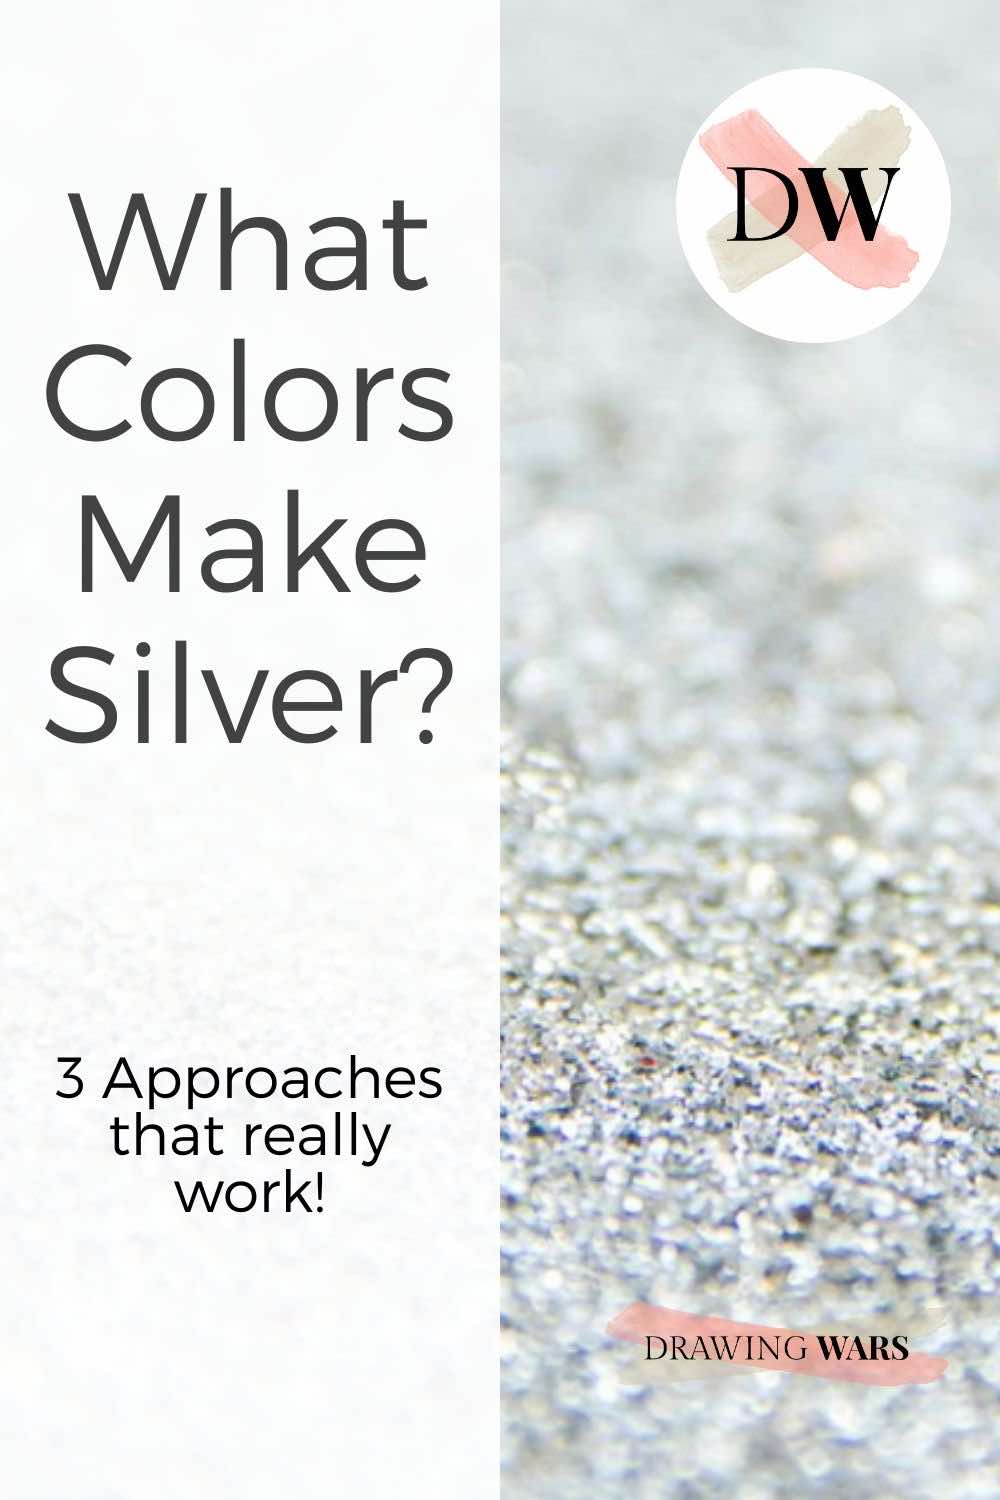 What Colors Make Silver? 3 Approaches that really work! Thumbnail